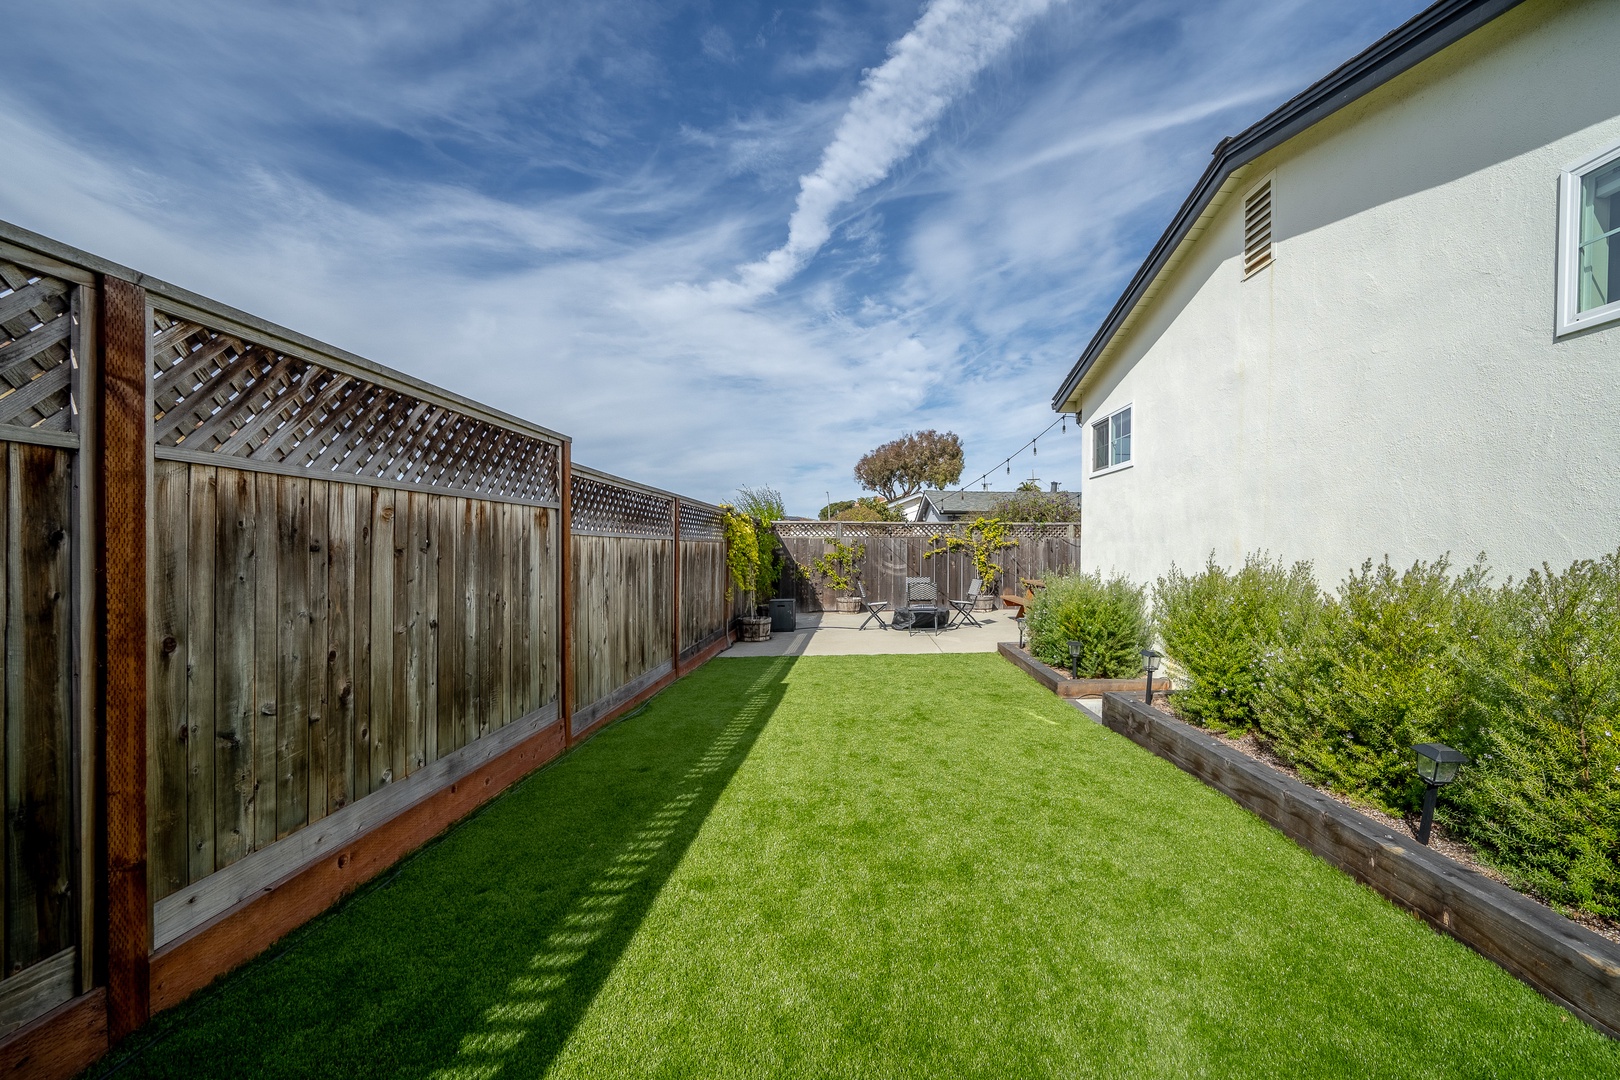 The private back yard offers ample space for relaxation, dining, & play